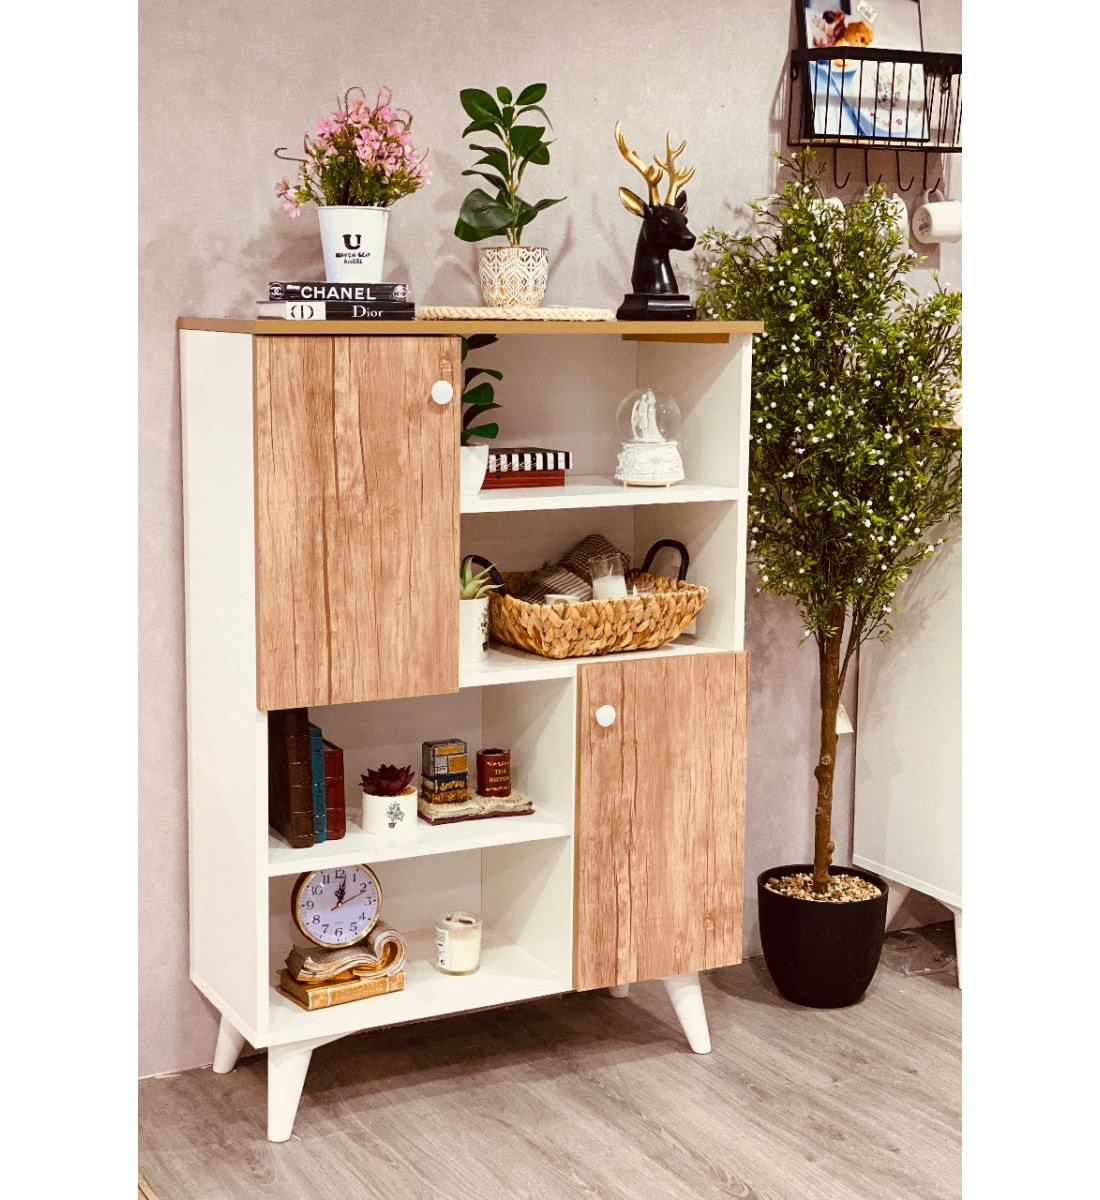 Cupboard shelving unit with 2 doors of wood, size 82 * 34 * 116 cm